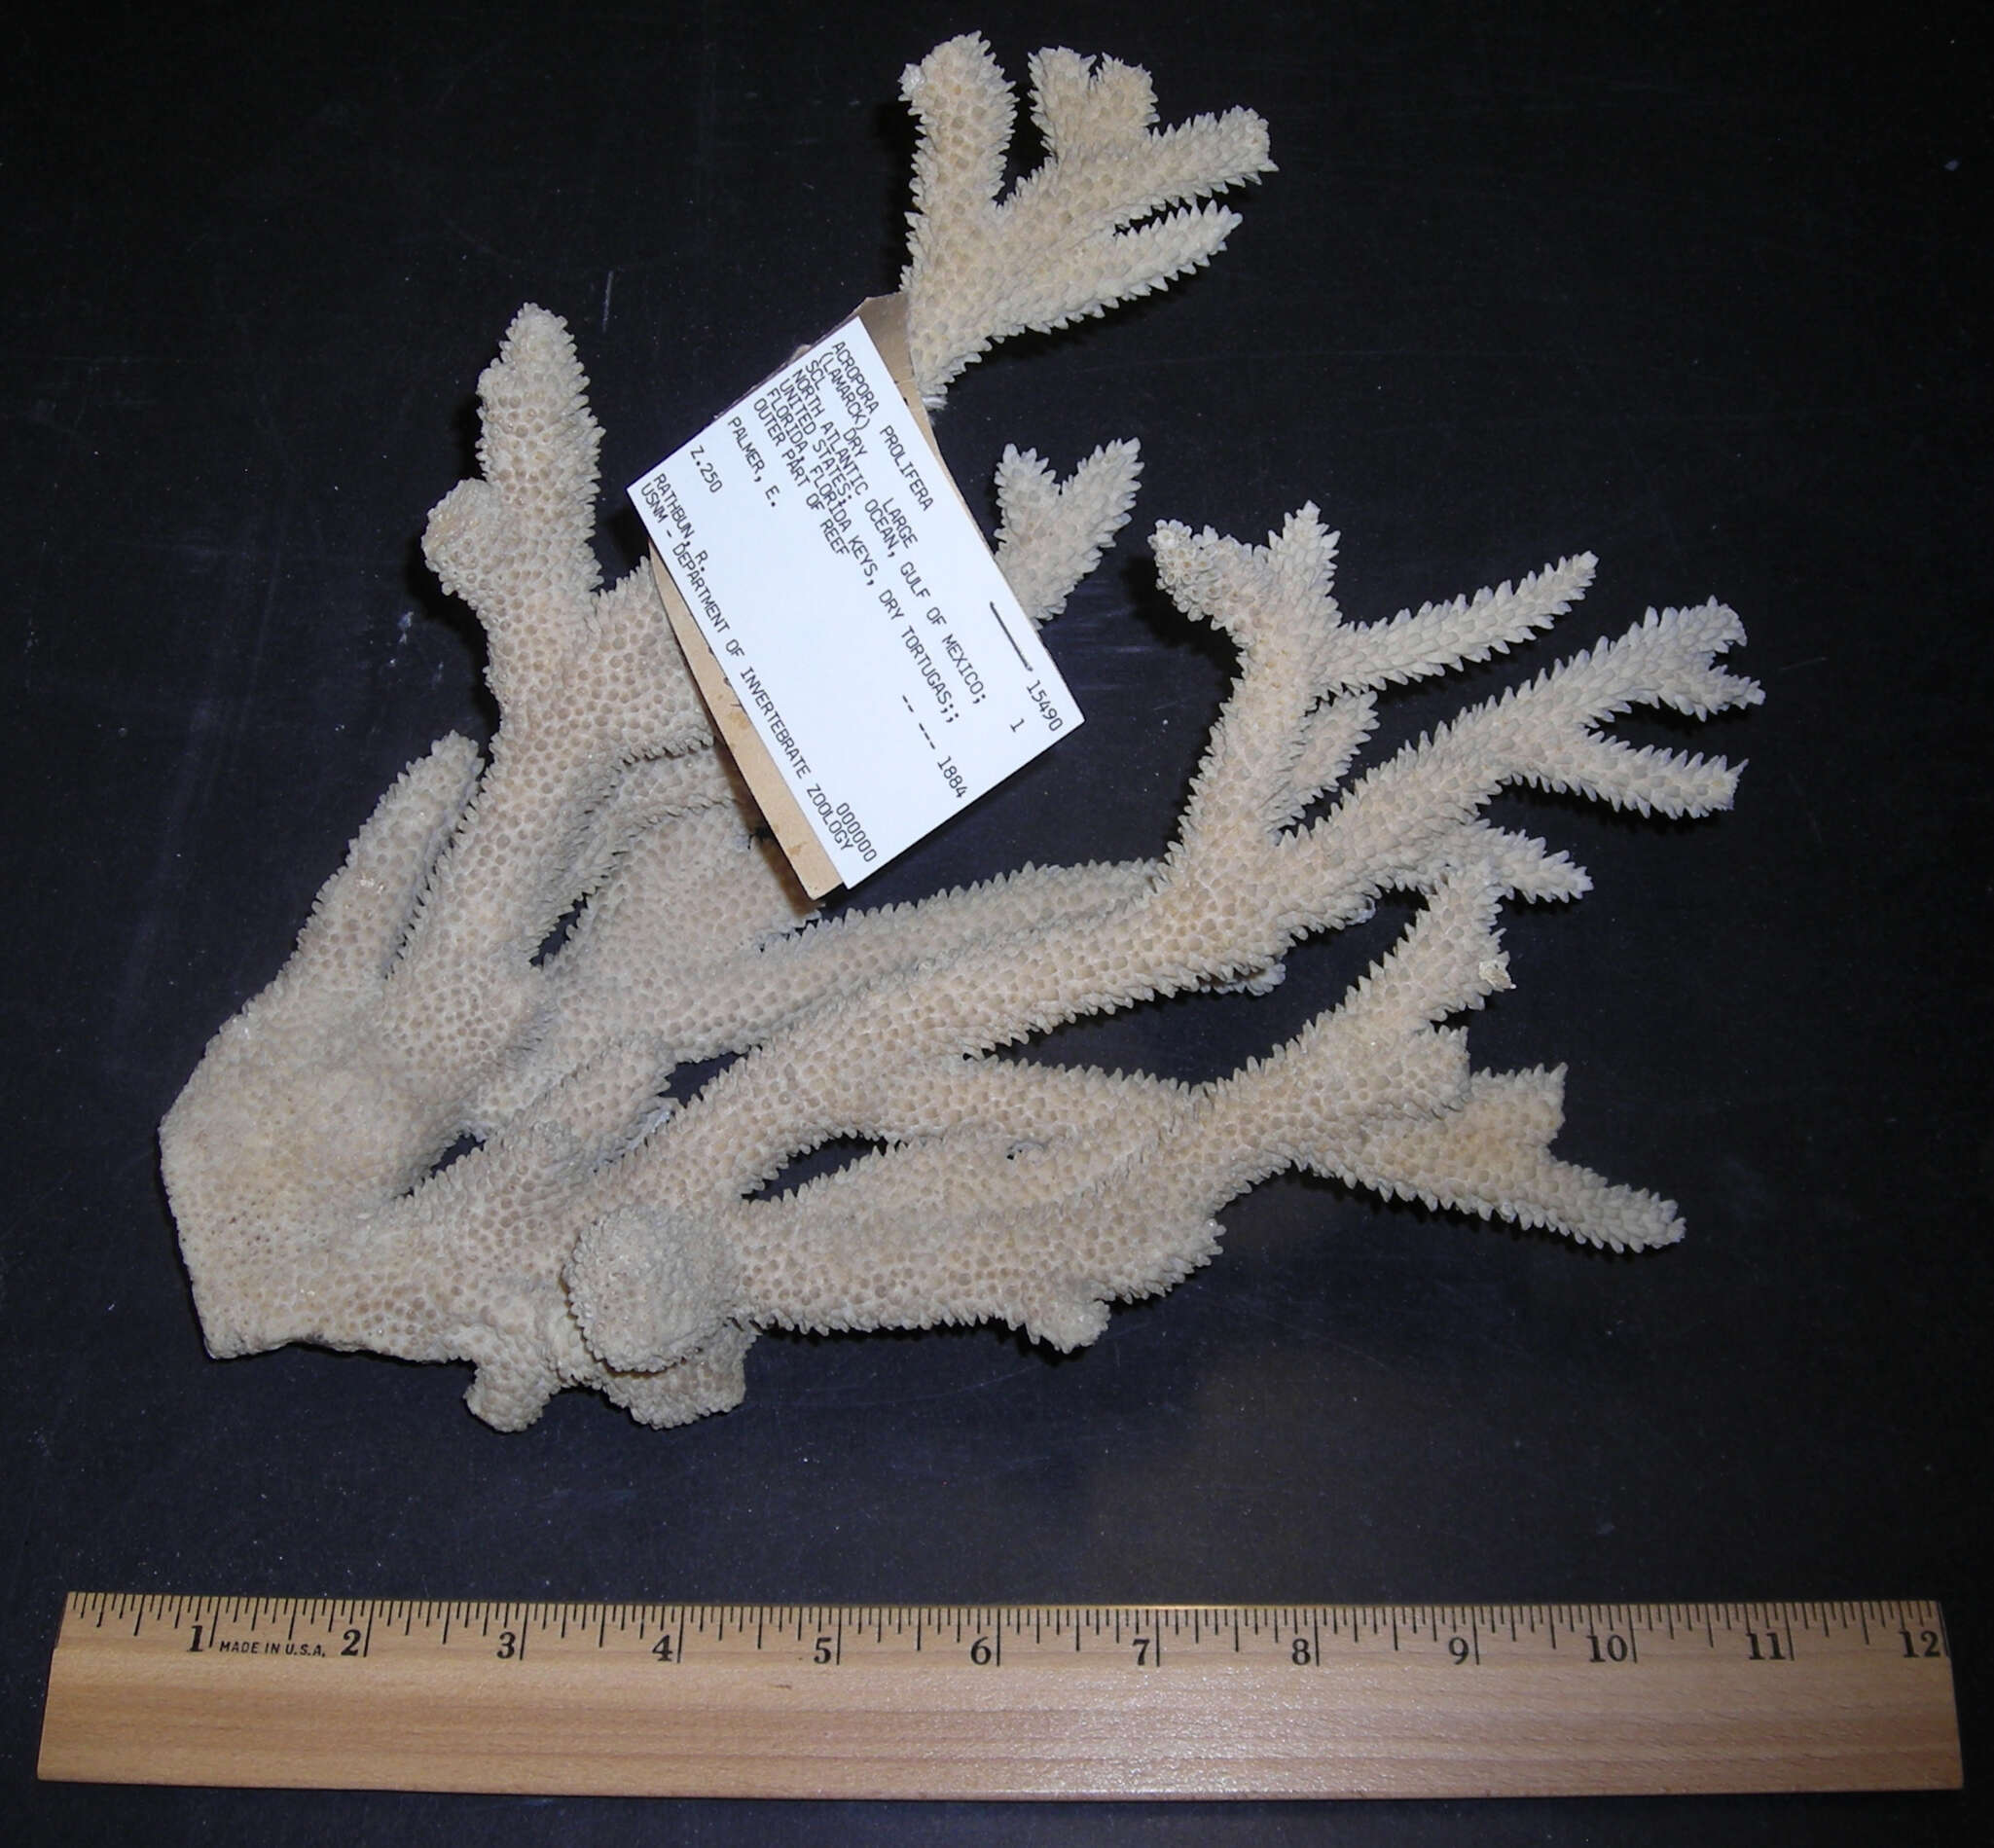 Image of Eight-ray finger coral